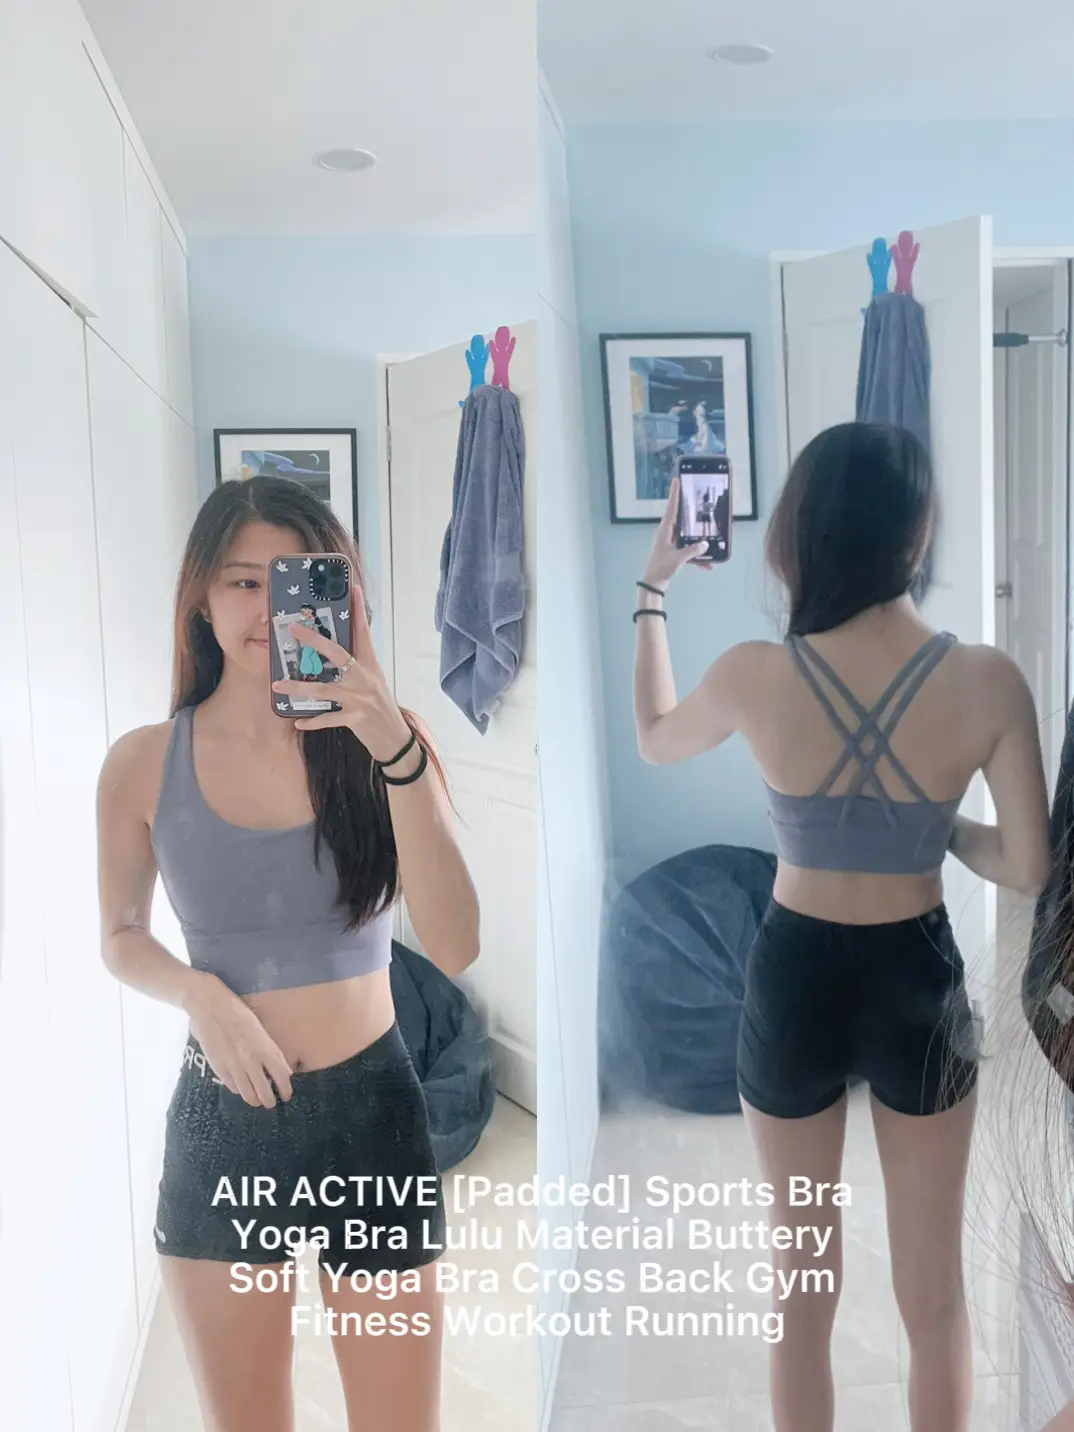 AFFORDABLE, cute and trendy activewear??